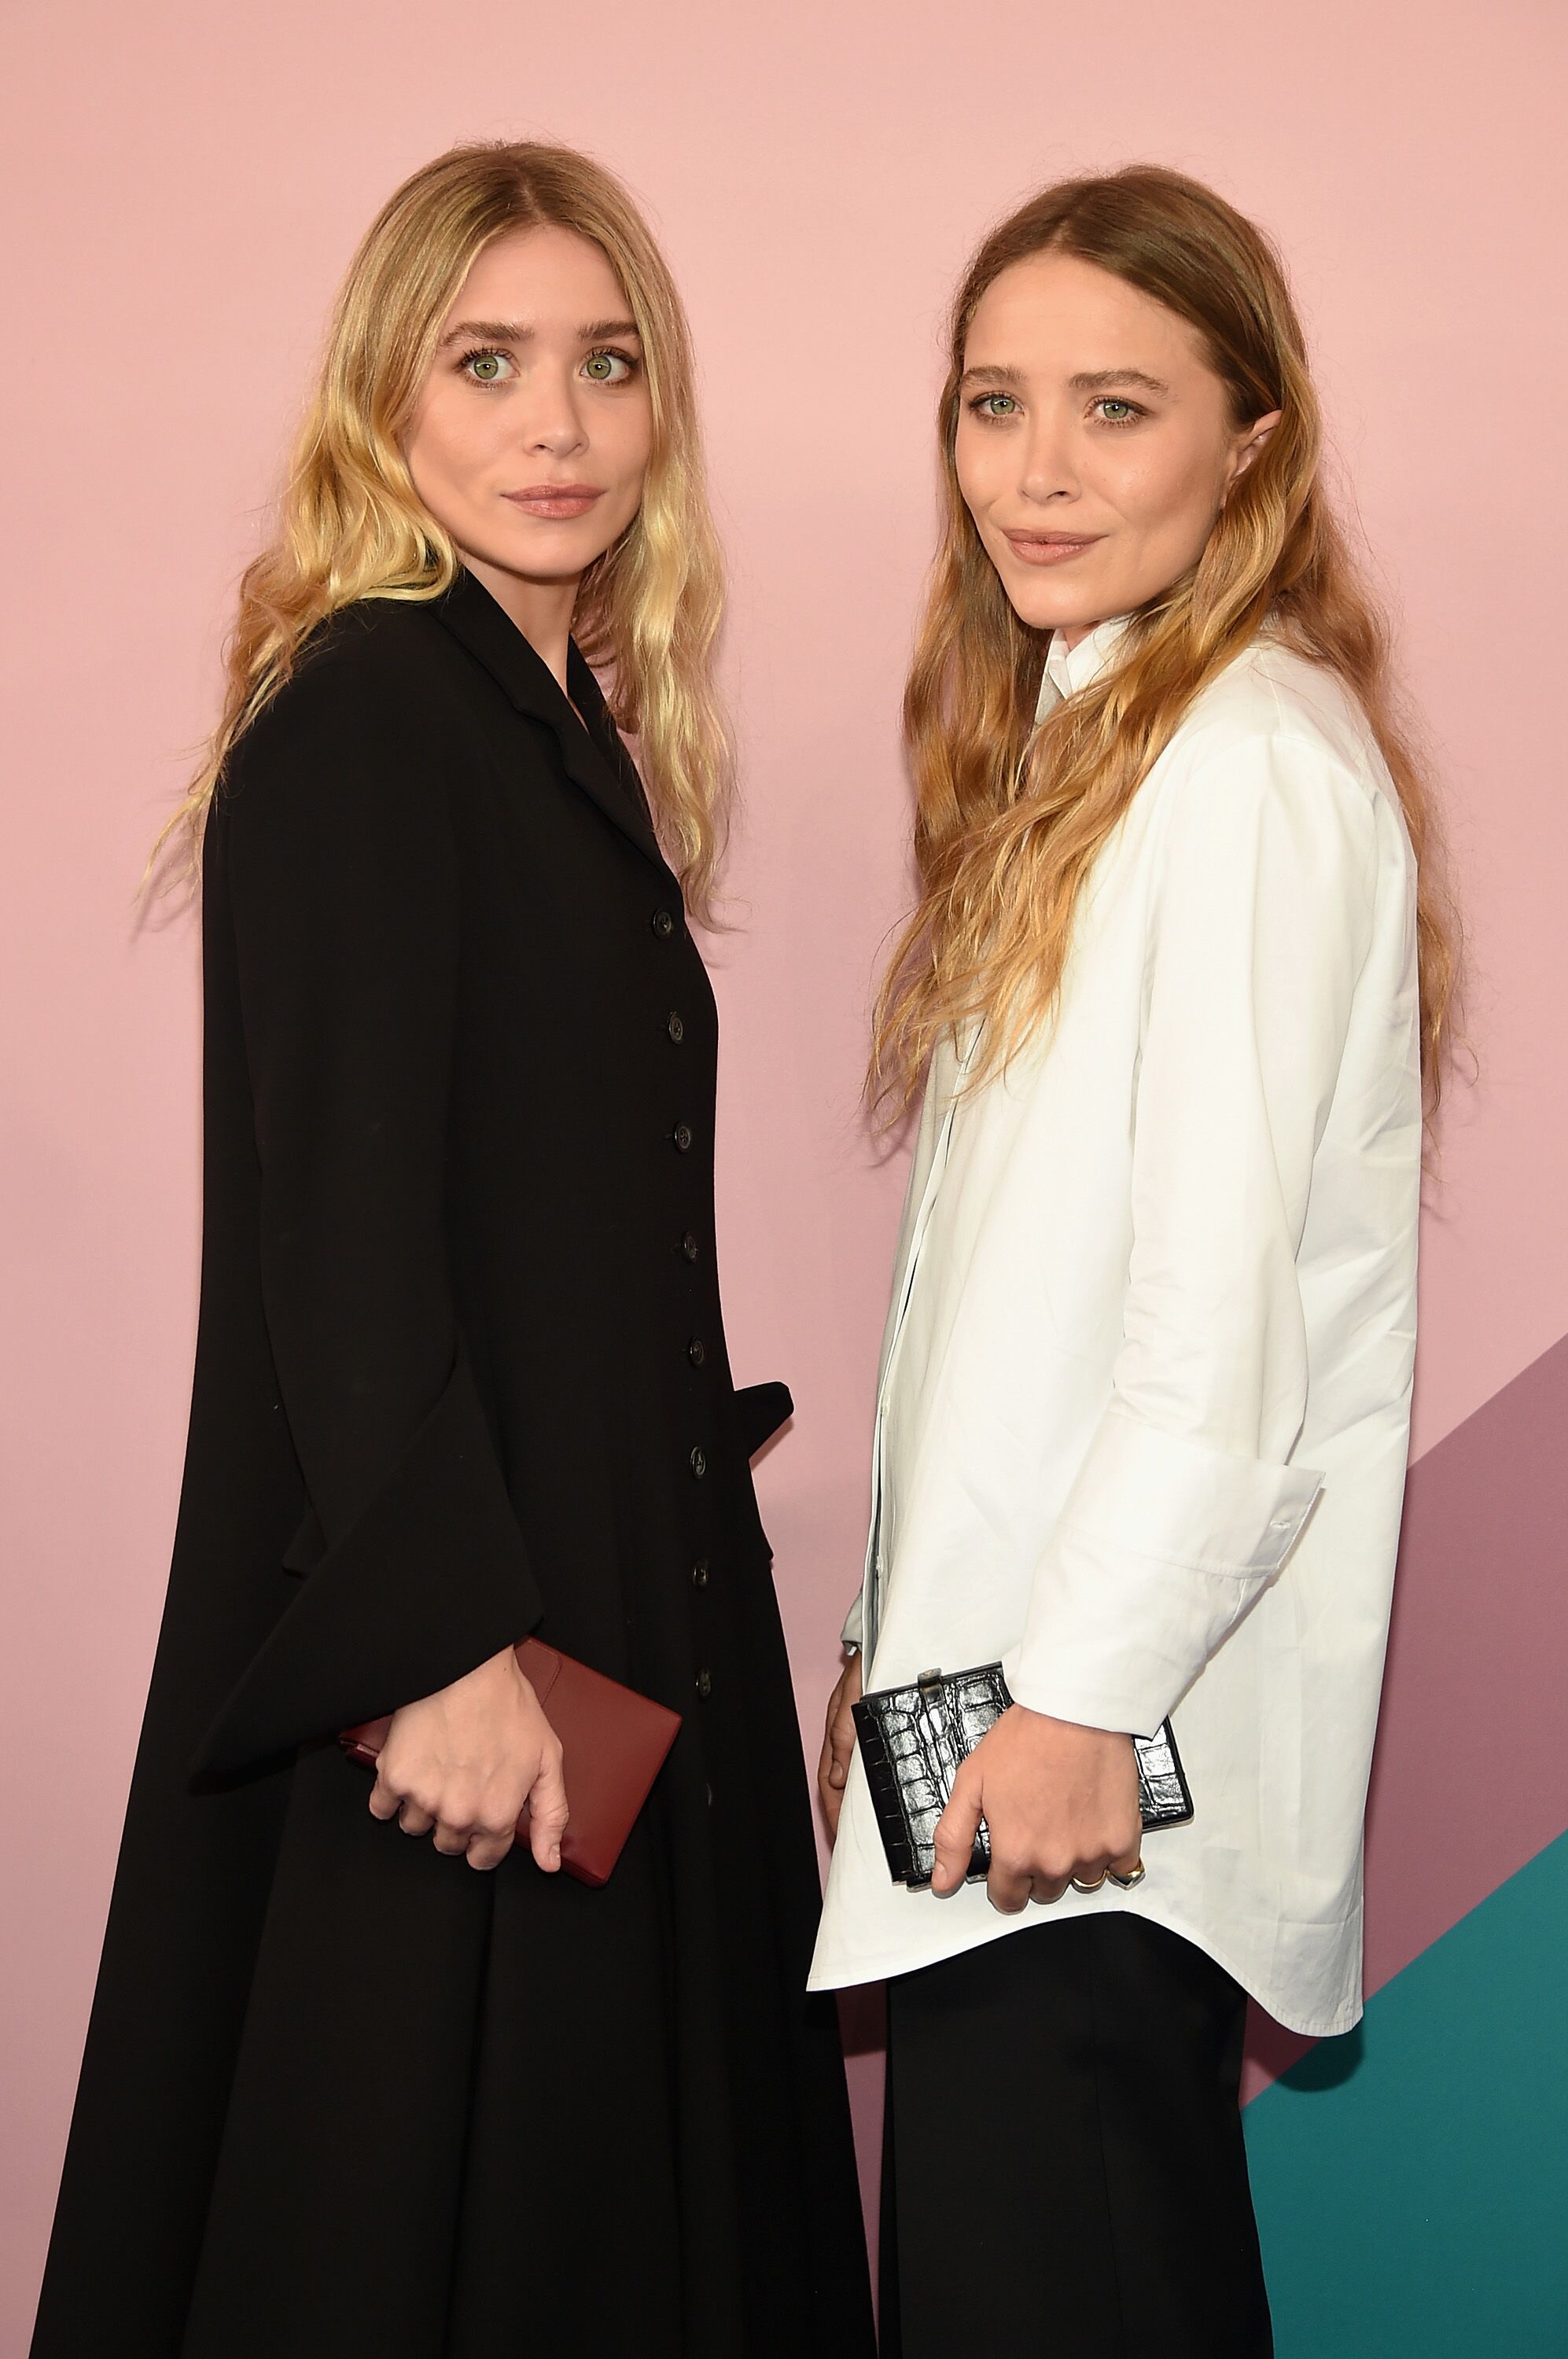 Ashley Olsen and Mary-Kate Olsen at the 2017 CFDA Fashion Awards in New York | Source: Getty Images